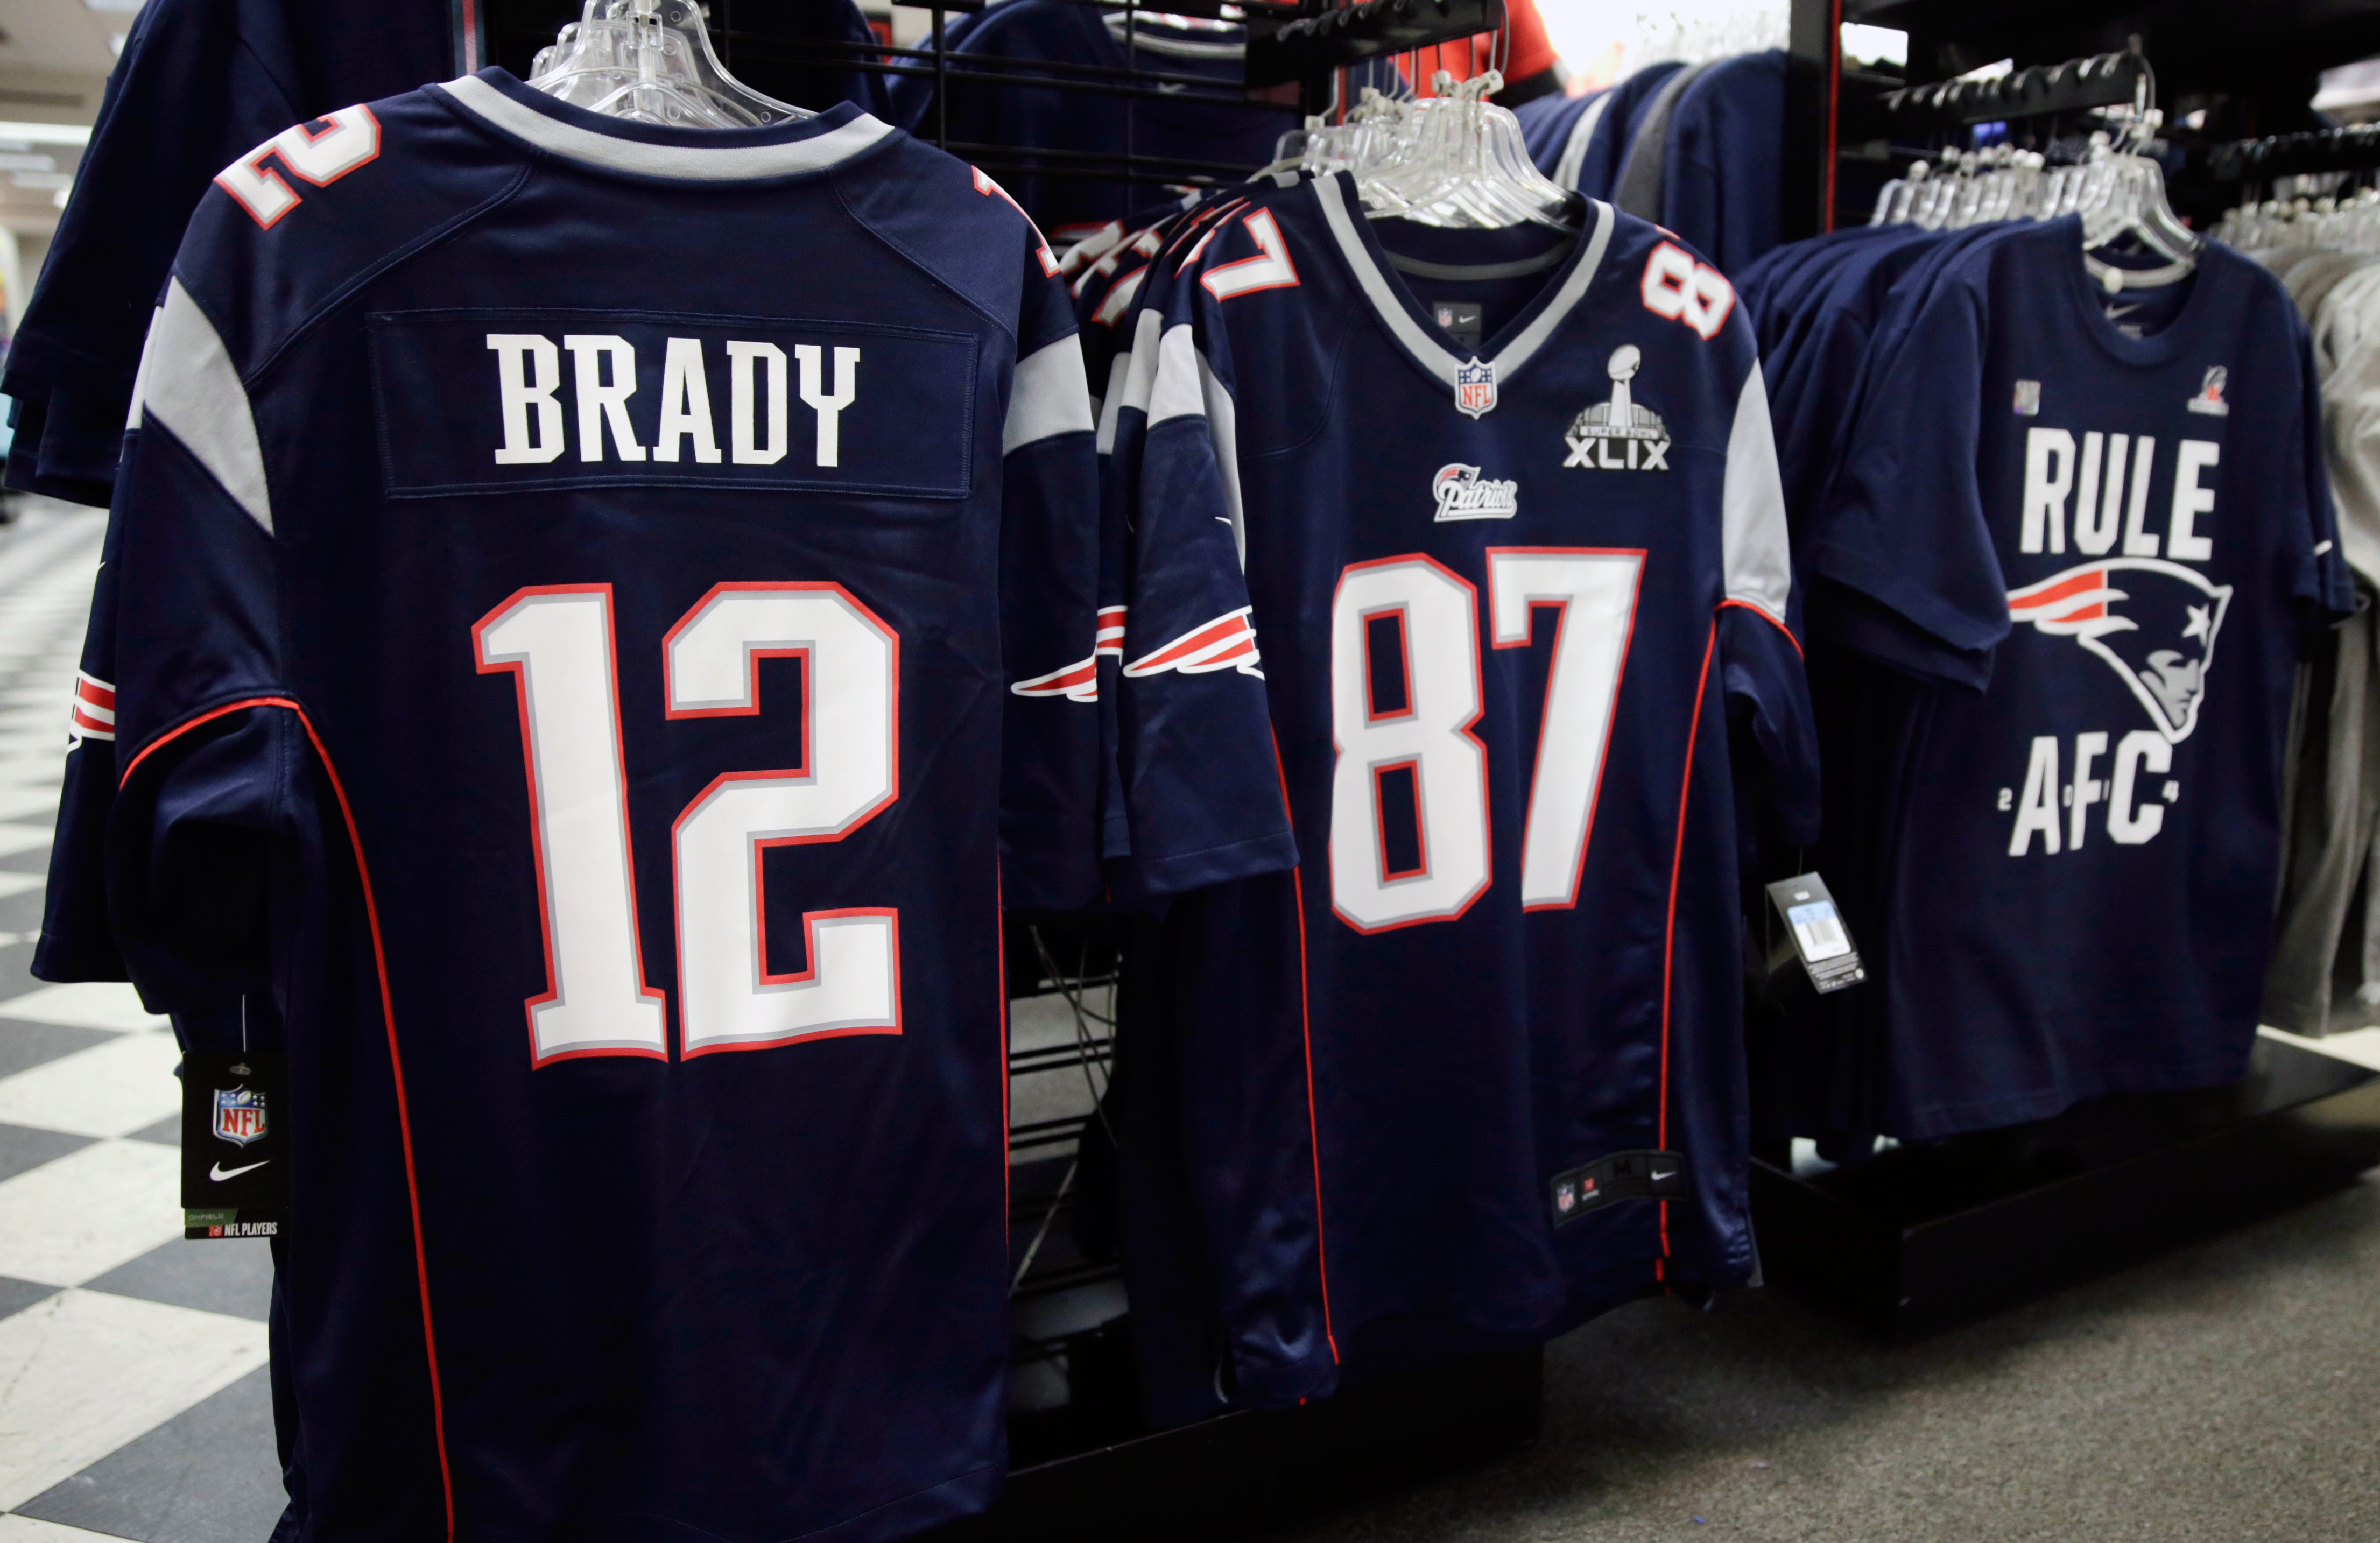 New England Patriots quarterback Tom Brady's jersey on the rack at the Olympia Sports store. The Patriots will face the Seattle Seahawks in Super Bowl XLIX on Sunday, Feb. 1, 2015, in Glendale, Ariz.